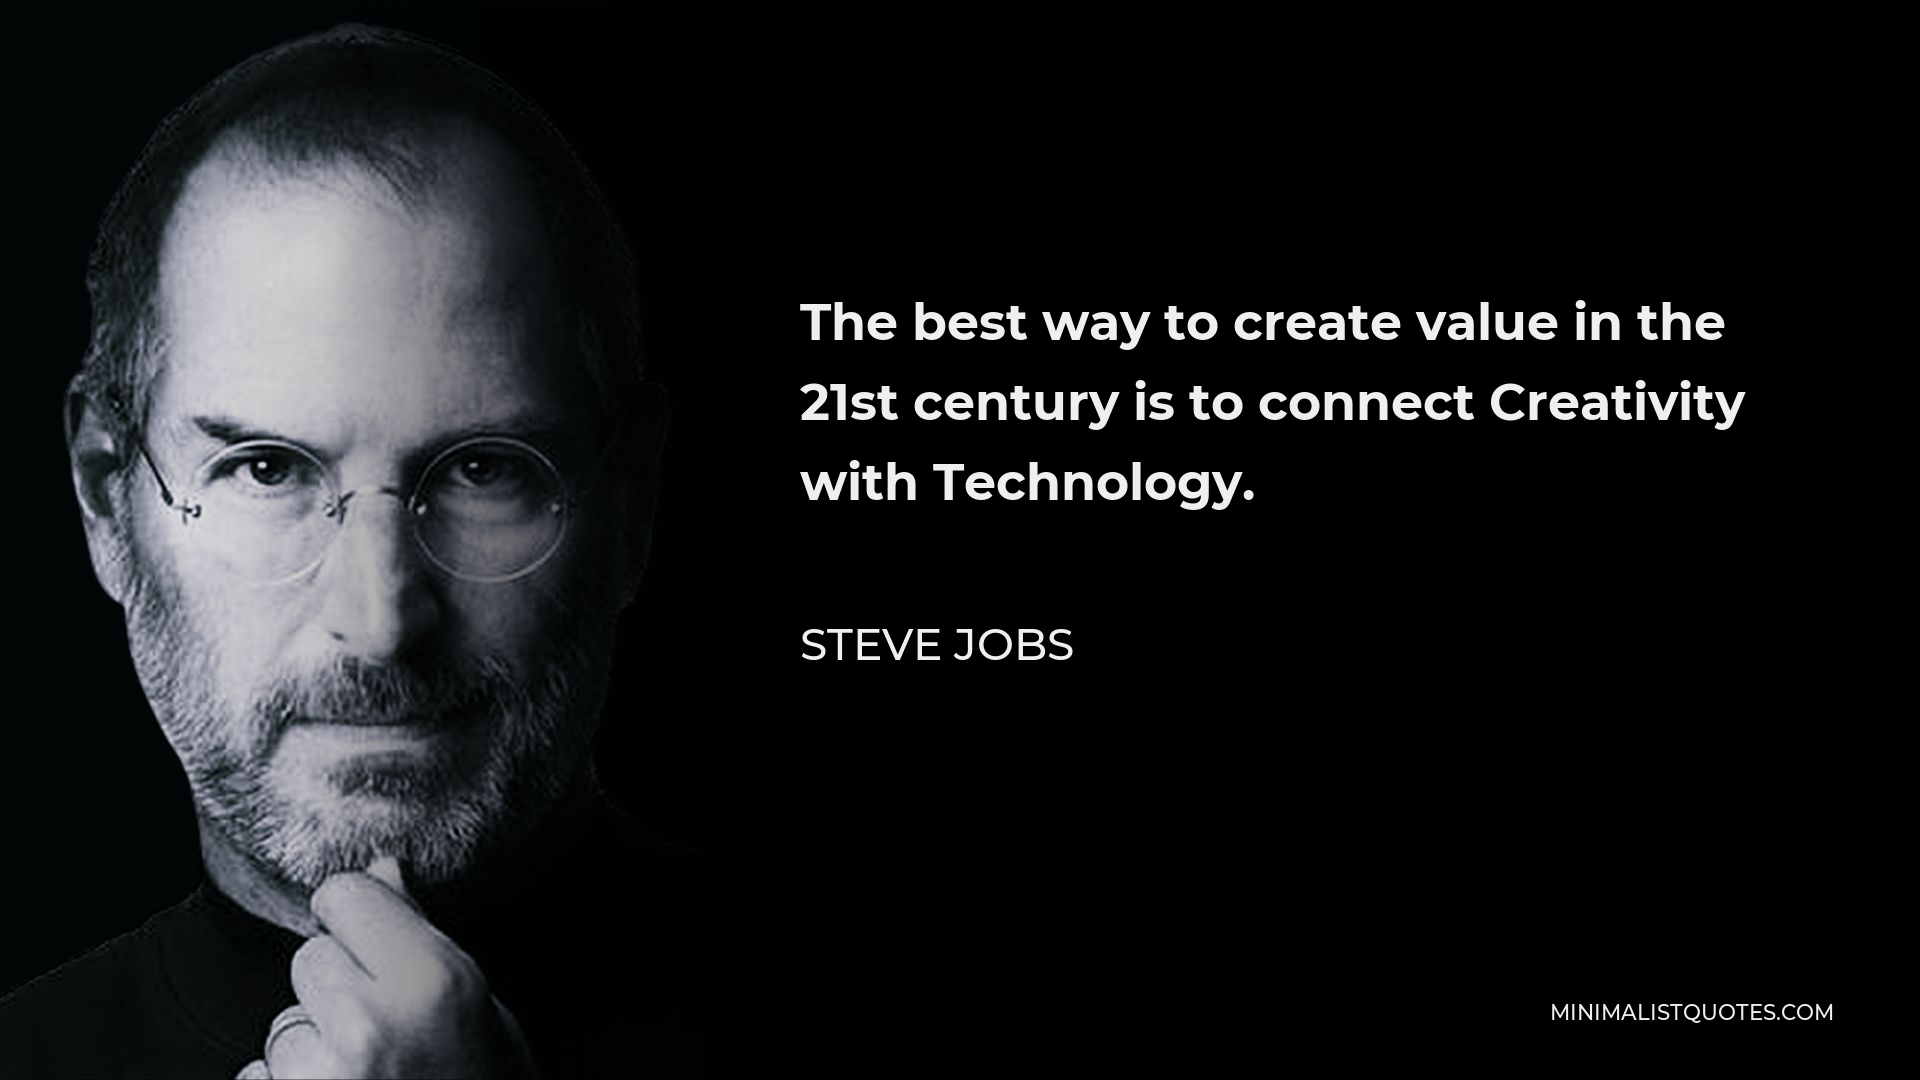 Steve Jobs Quote - The best way to create value in the 21st century is to connect Creativity with Technology.